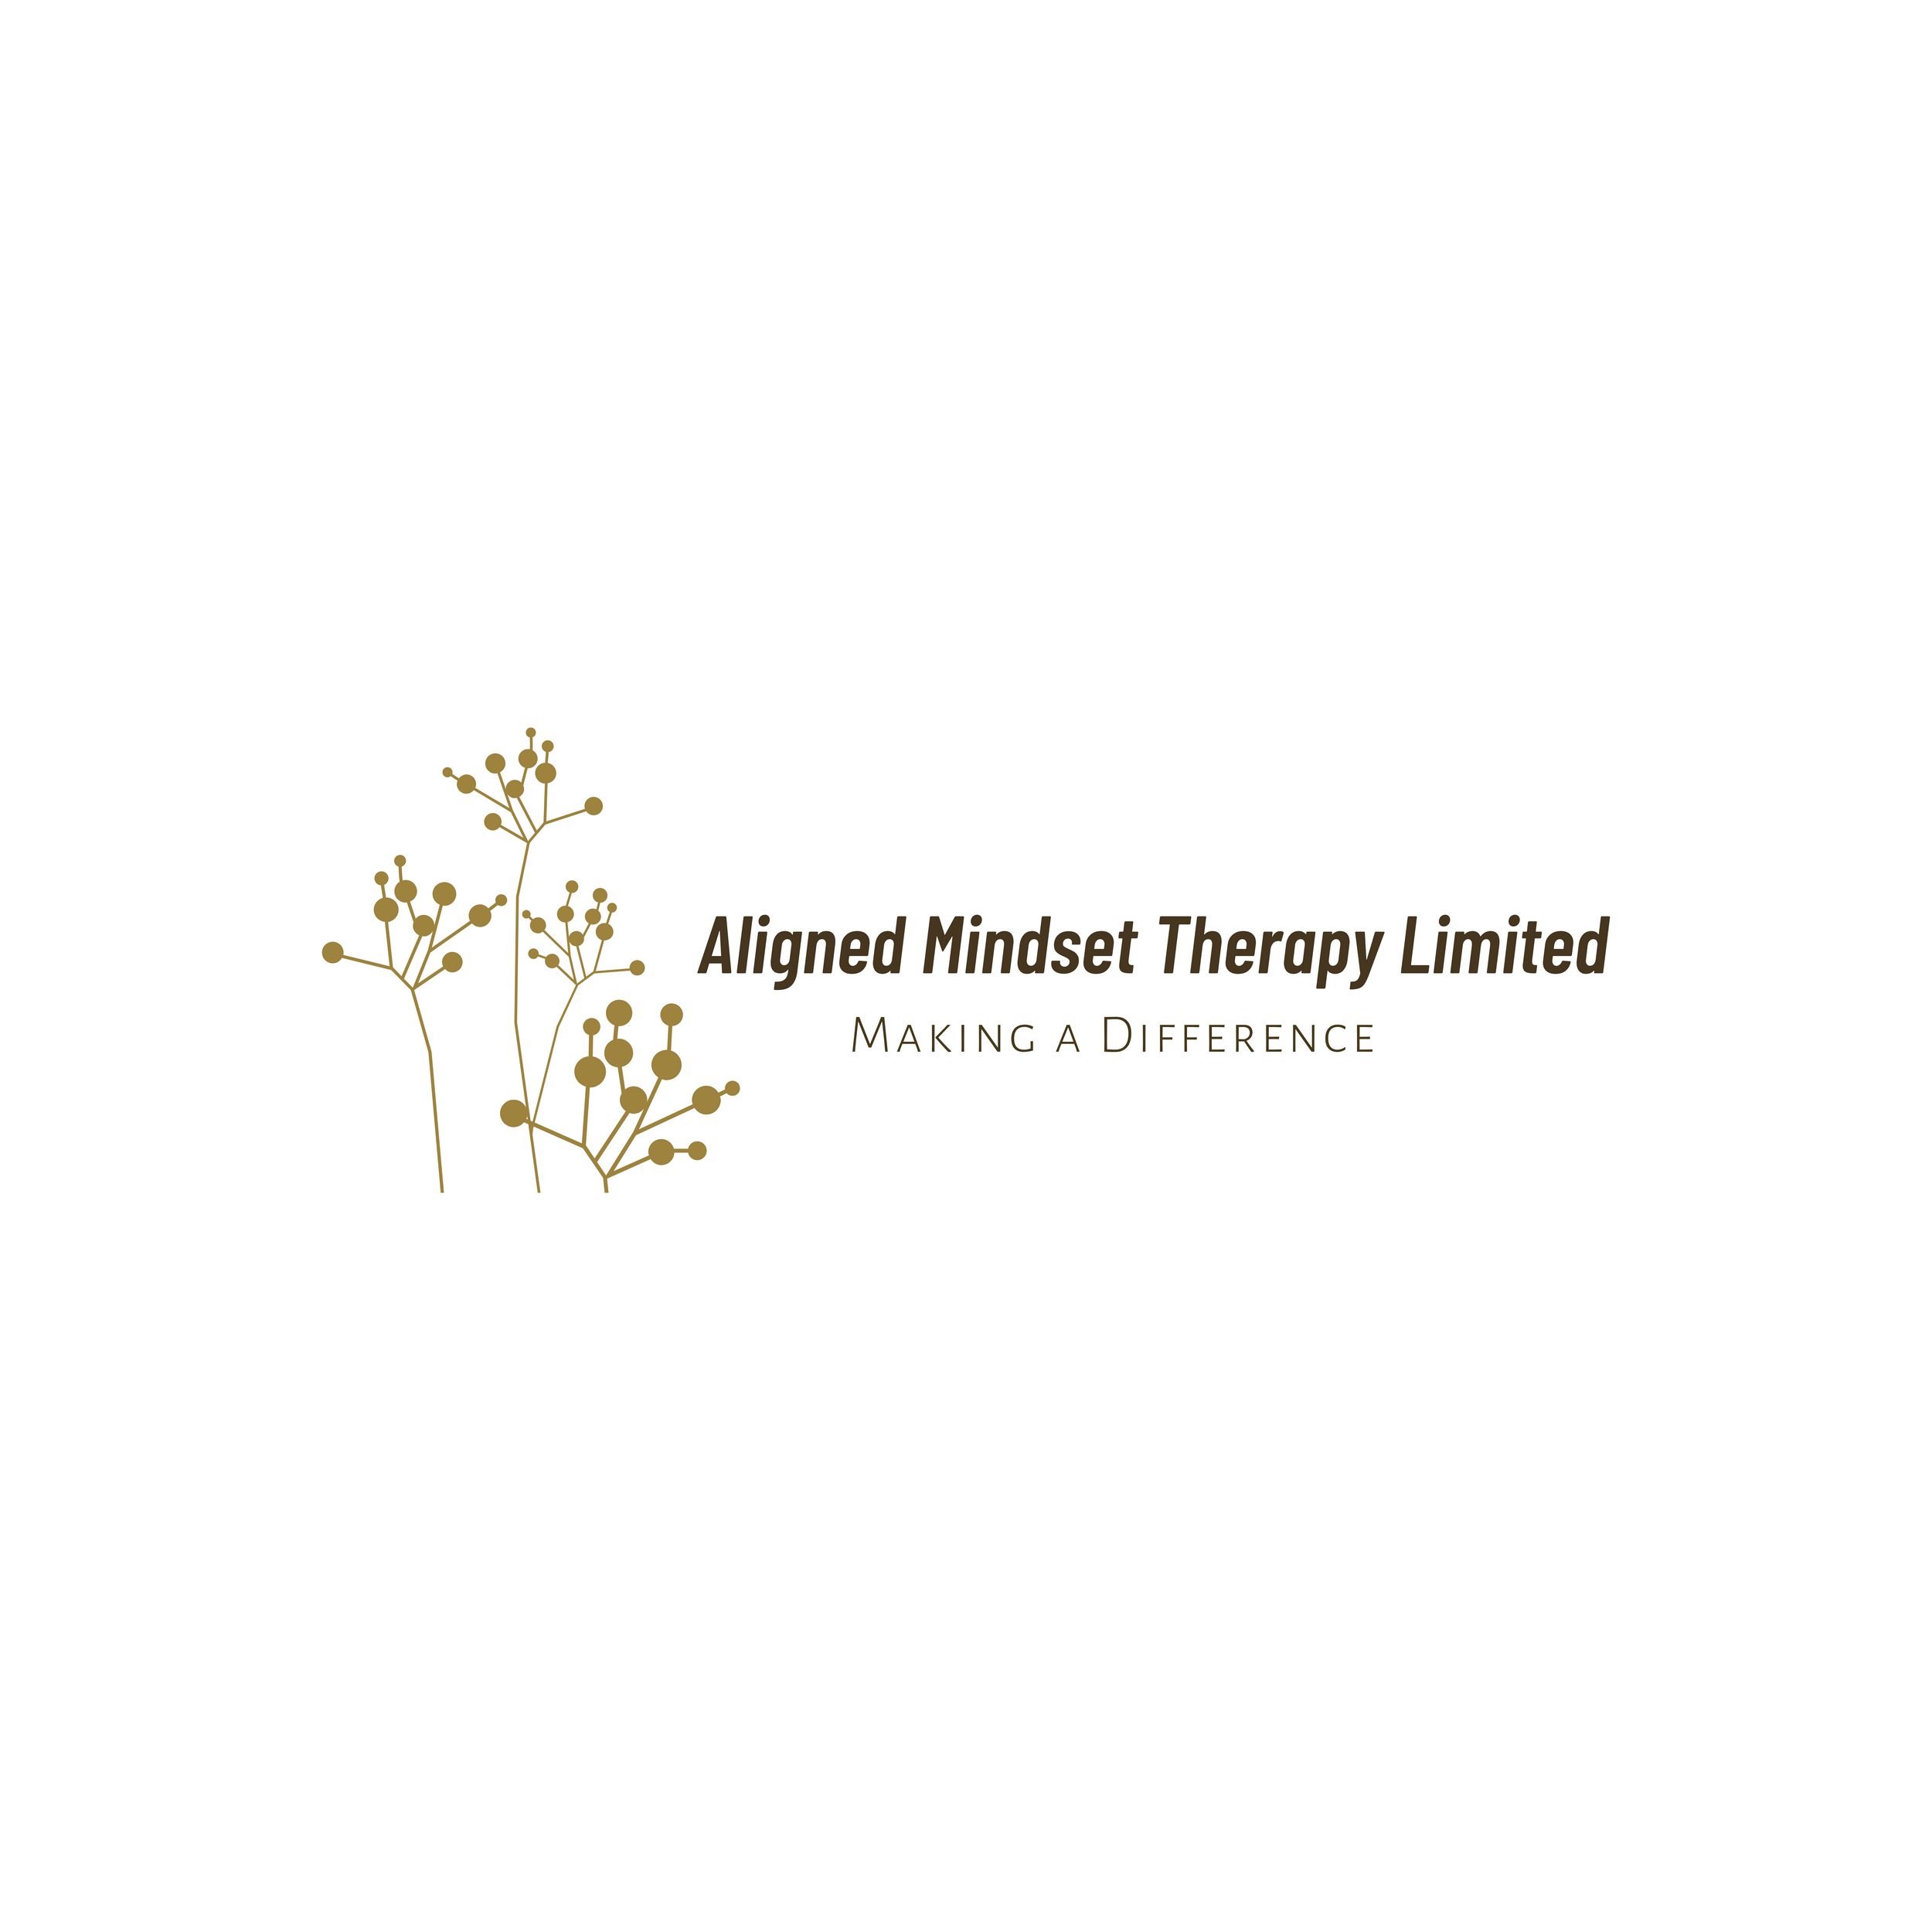 Aligned Mindset Therapy